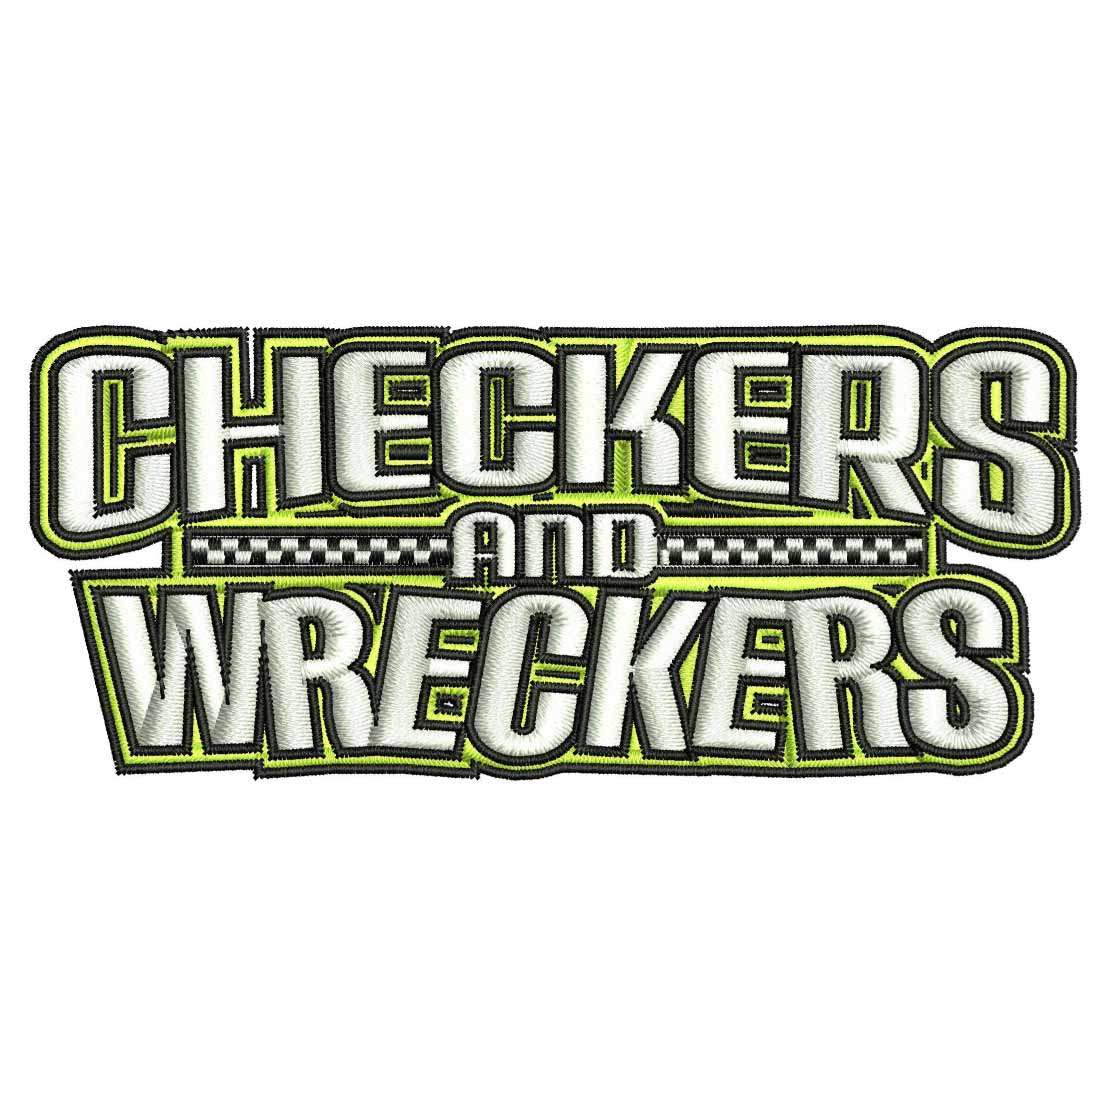 CHECKERS & WRECKERS 3-5 INCH